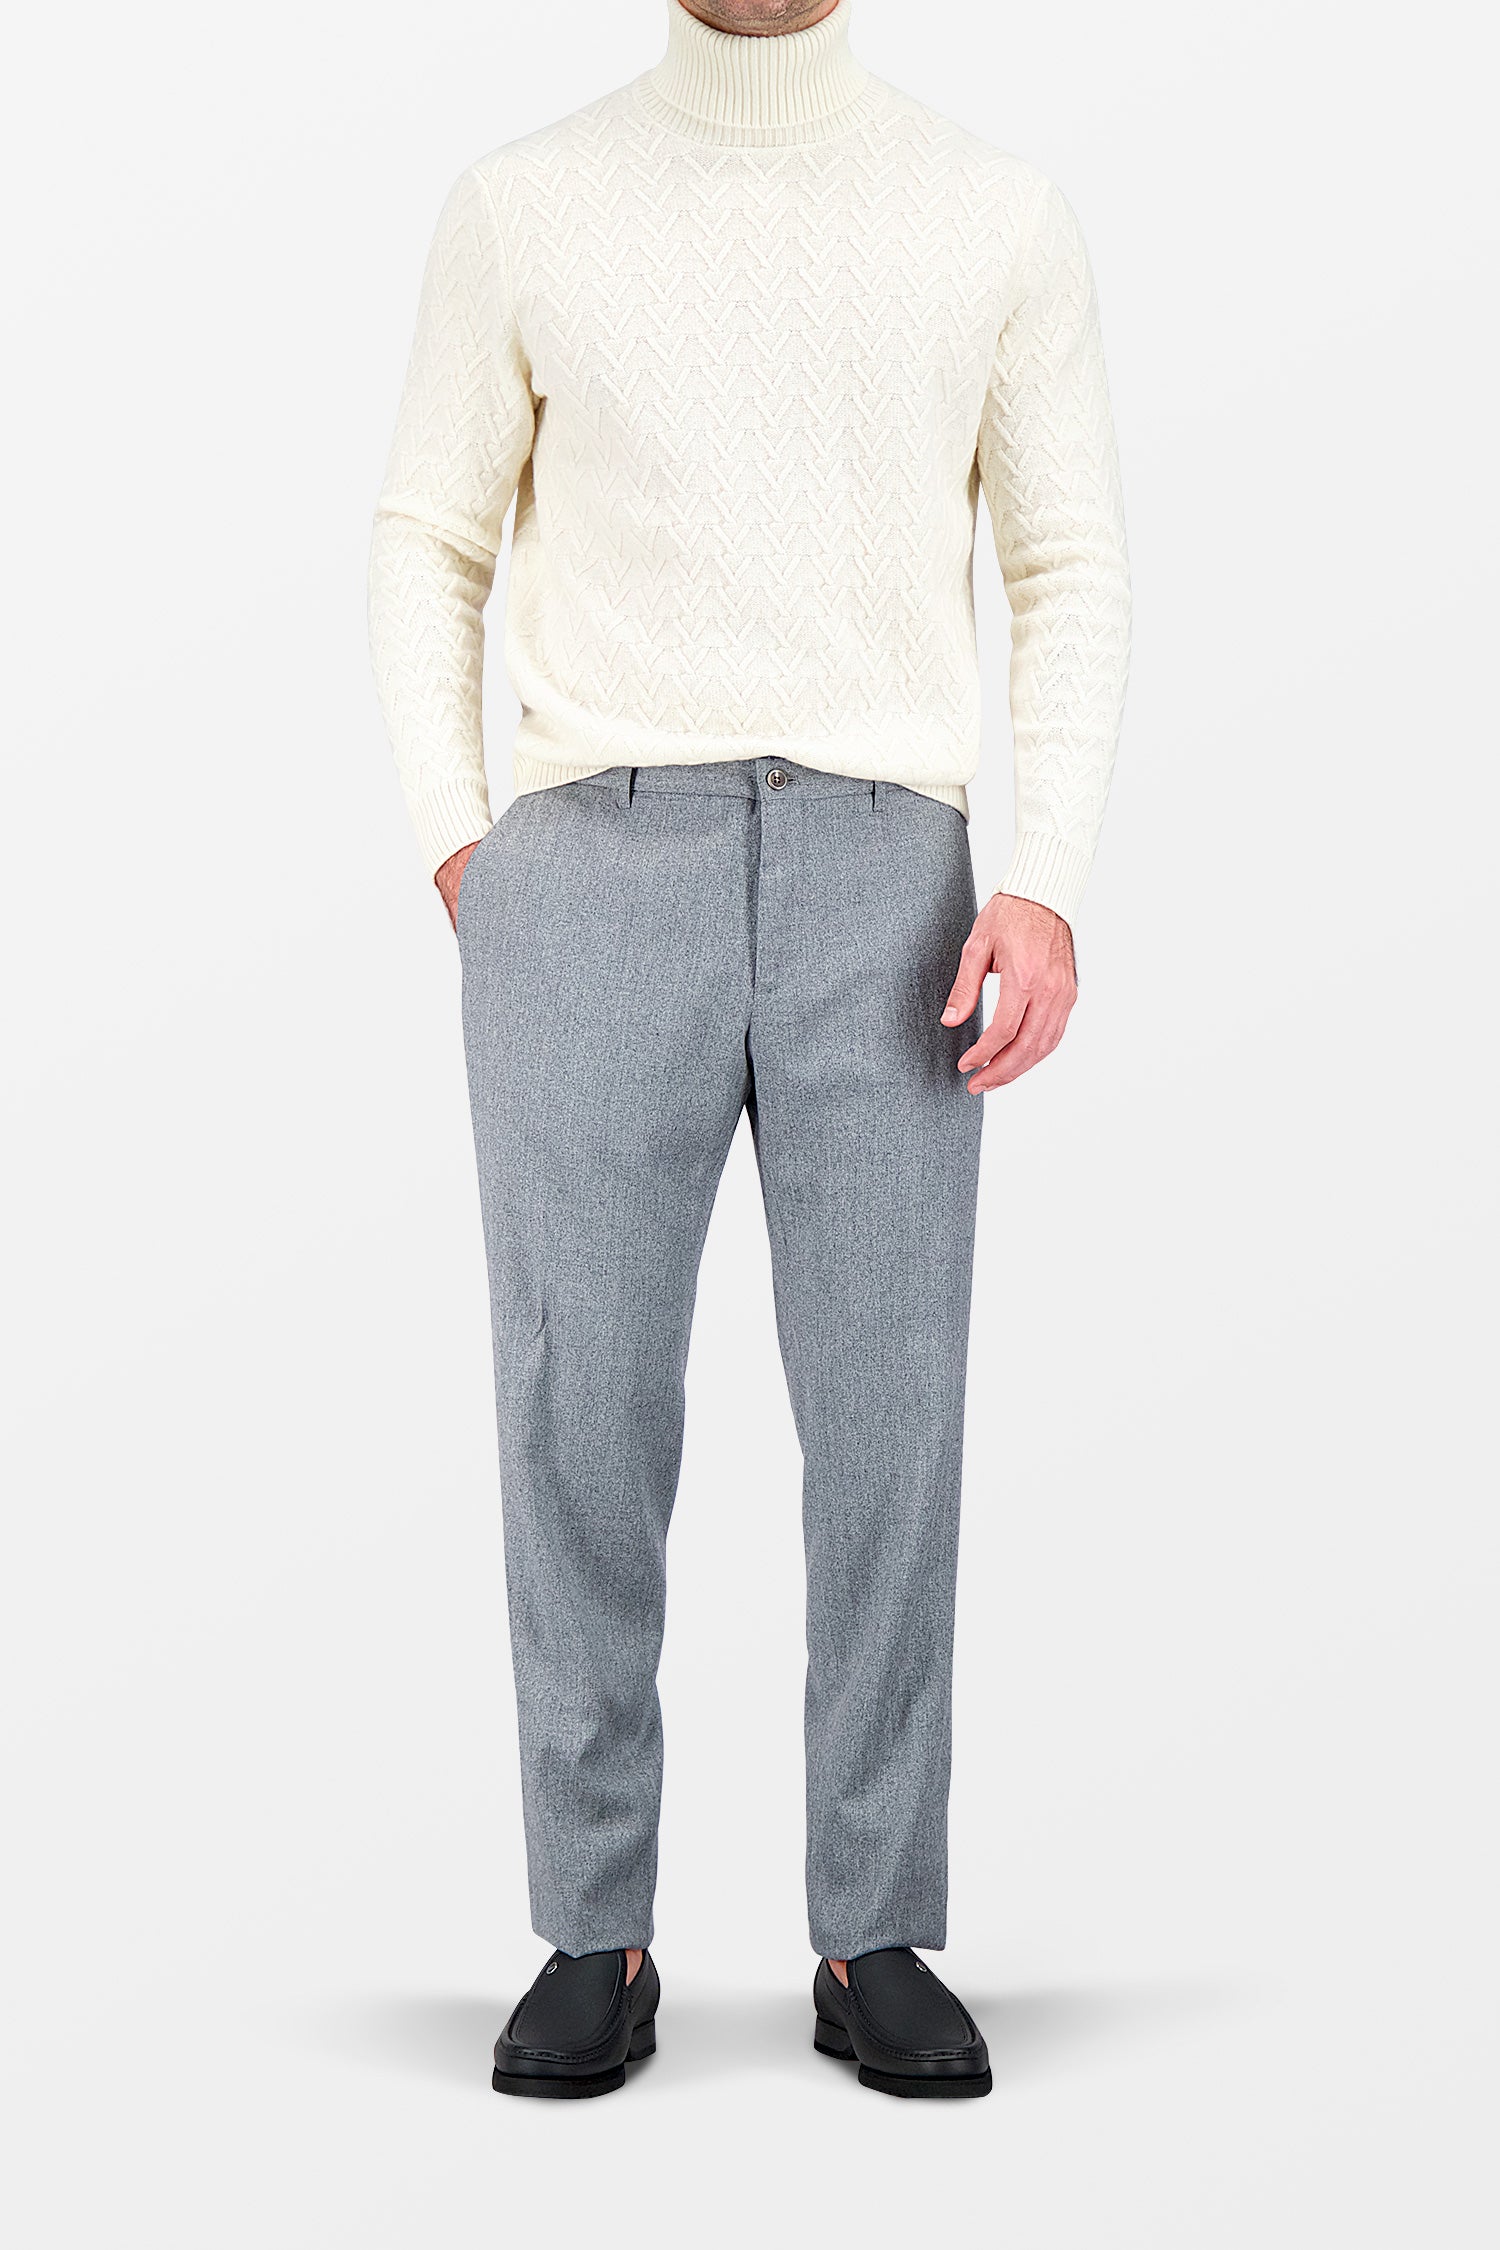 Incotex Grey Woven Trousers